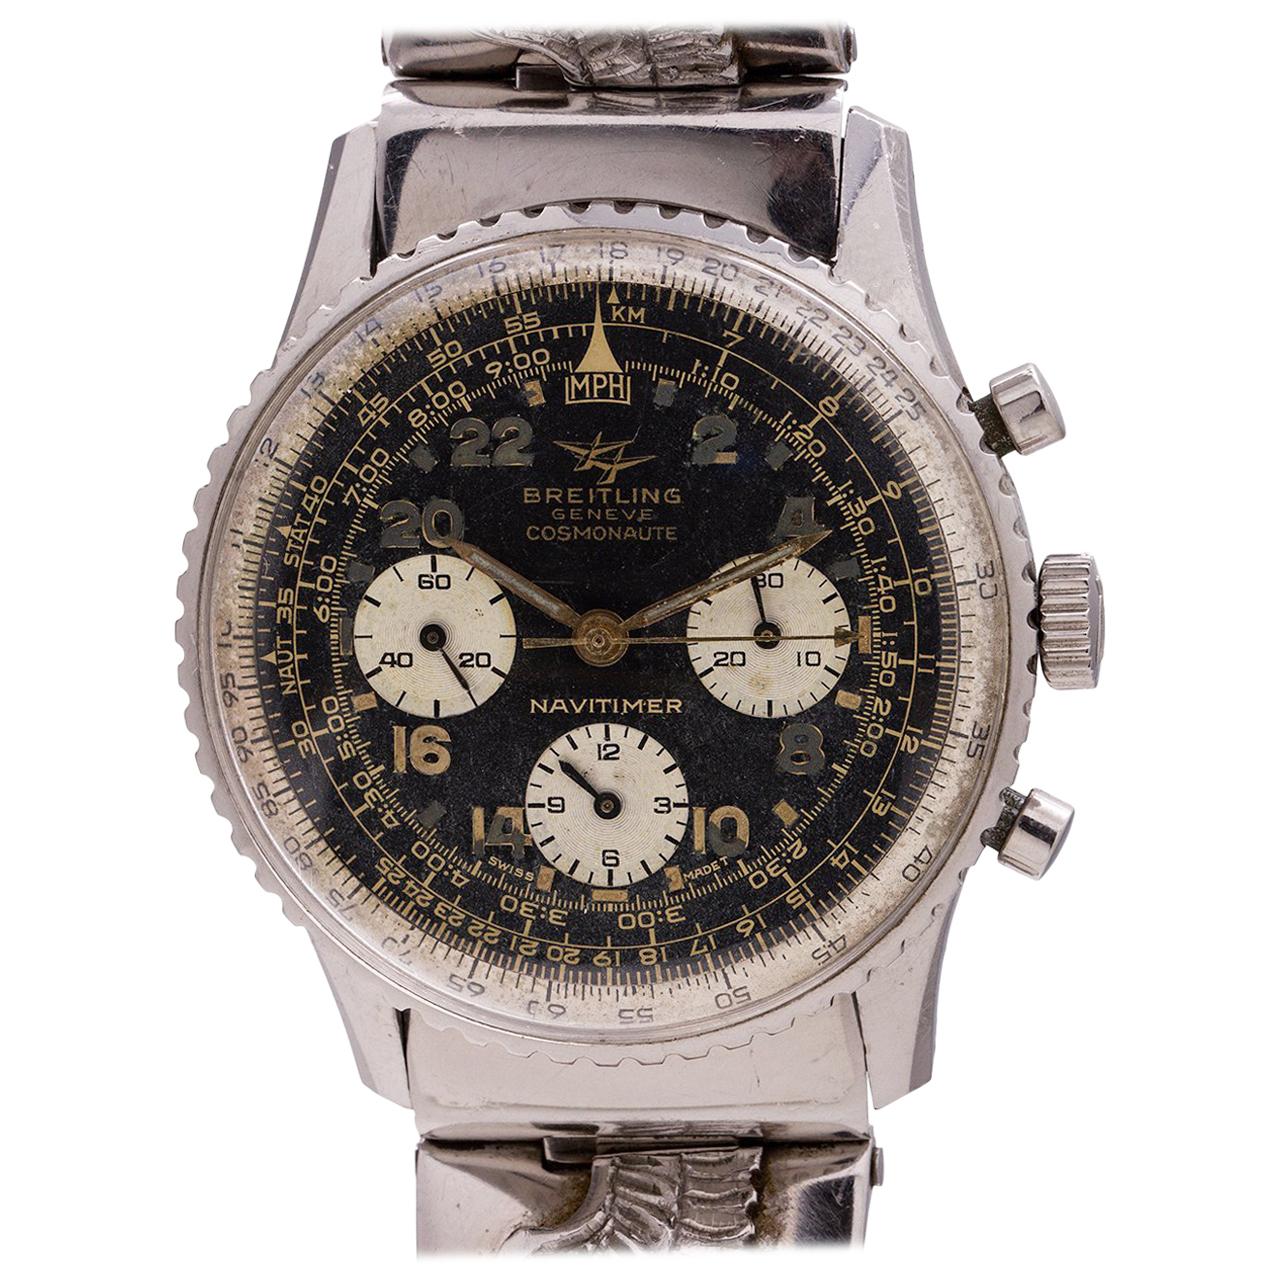 Breitling Stainless Steel Navitimer Cosmonaute Manual Wristwatch Ref 806, c 1965 For Sale